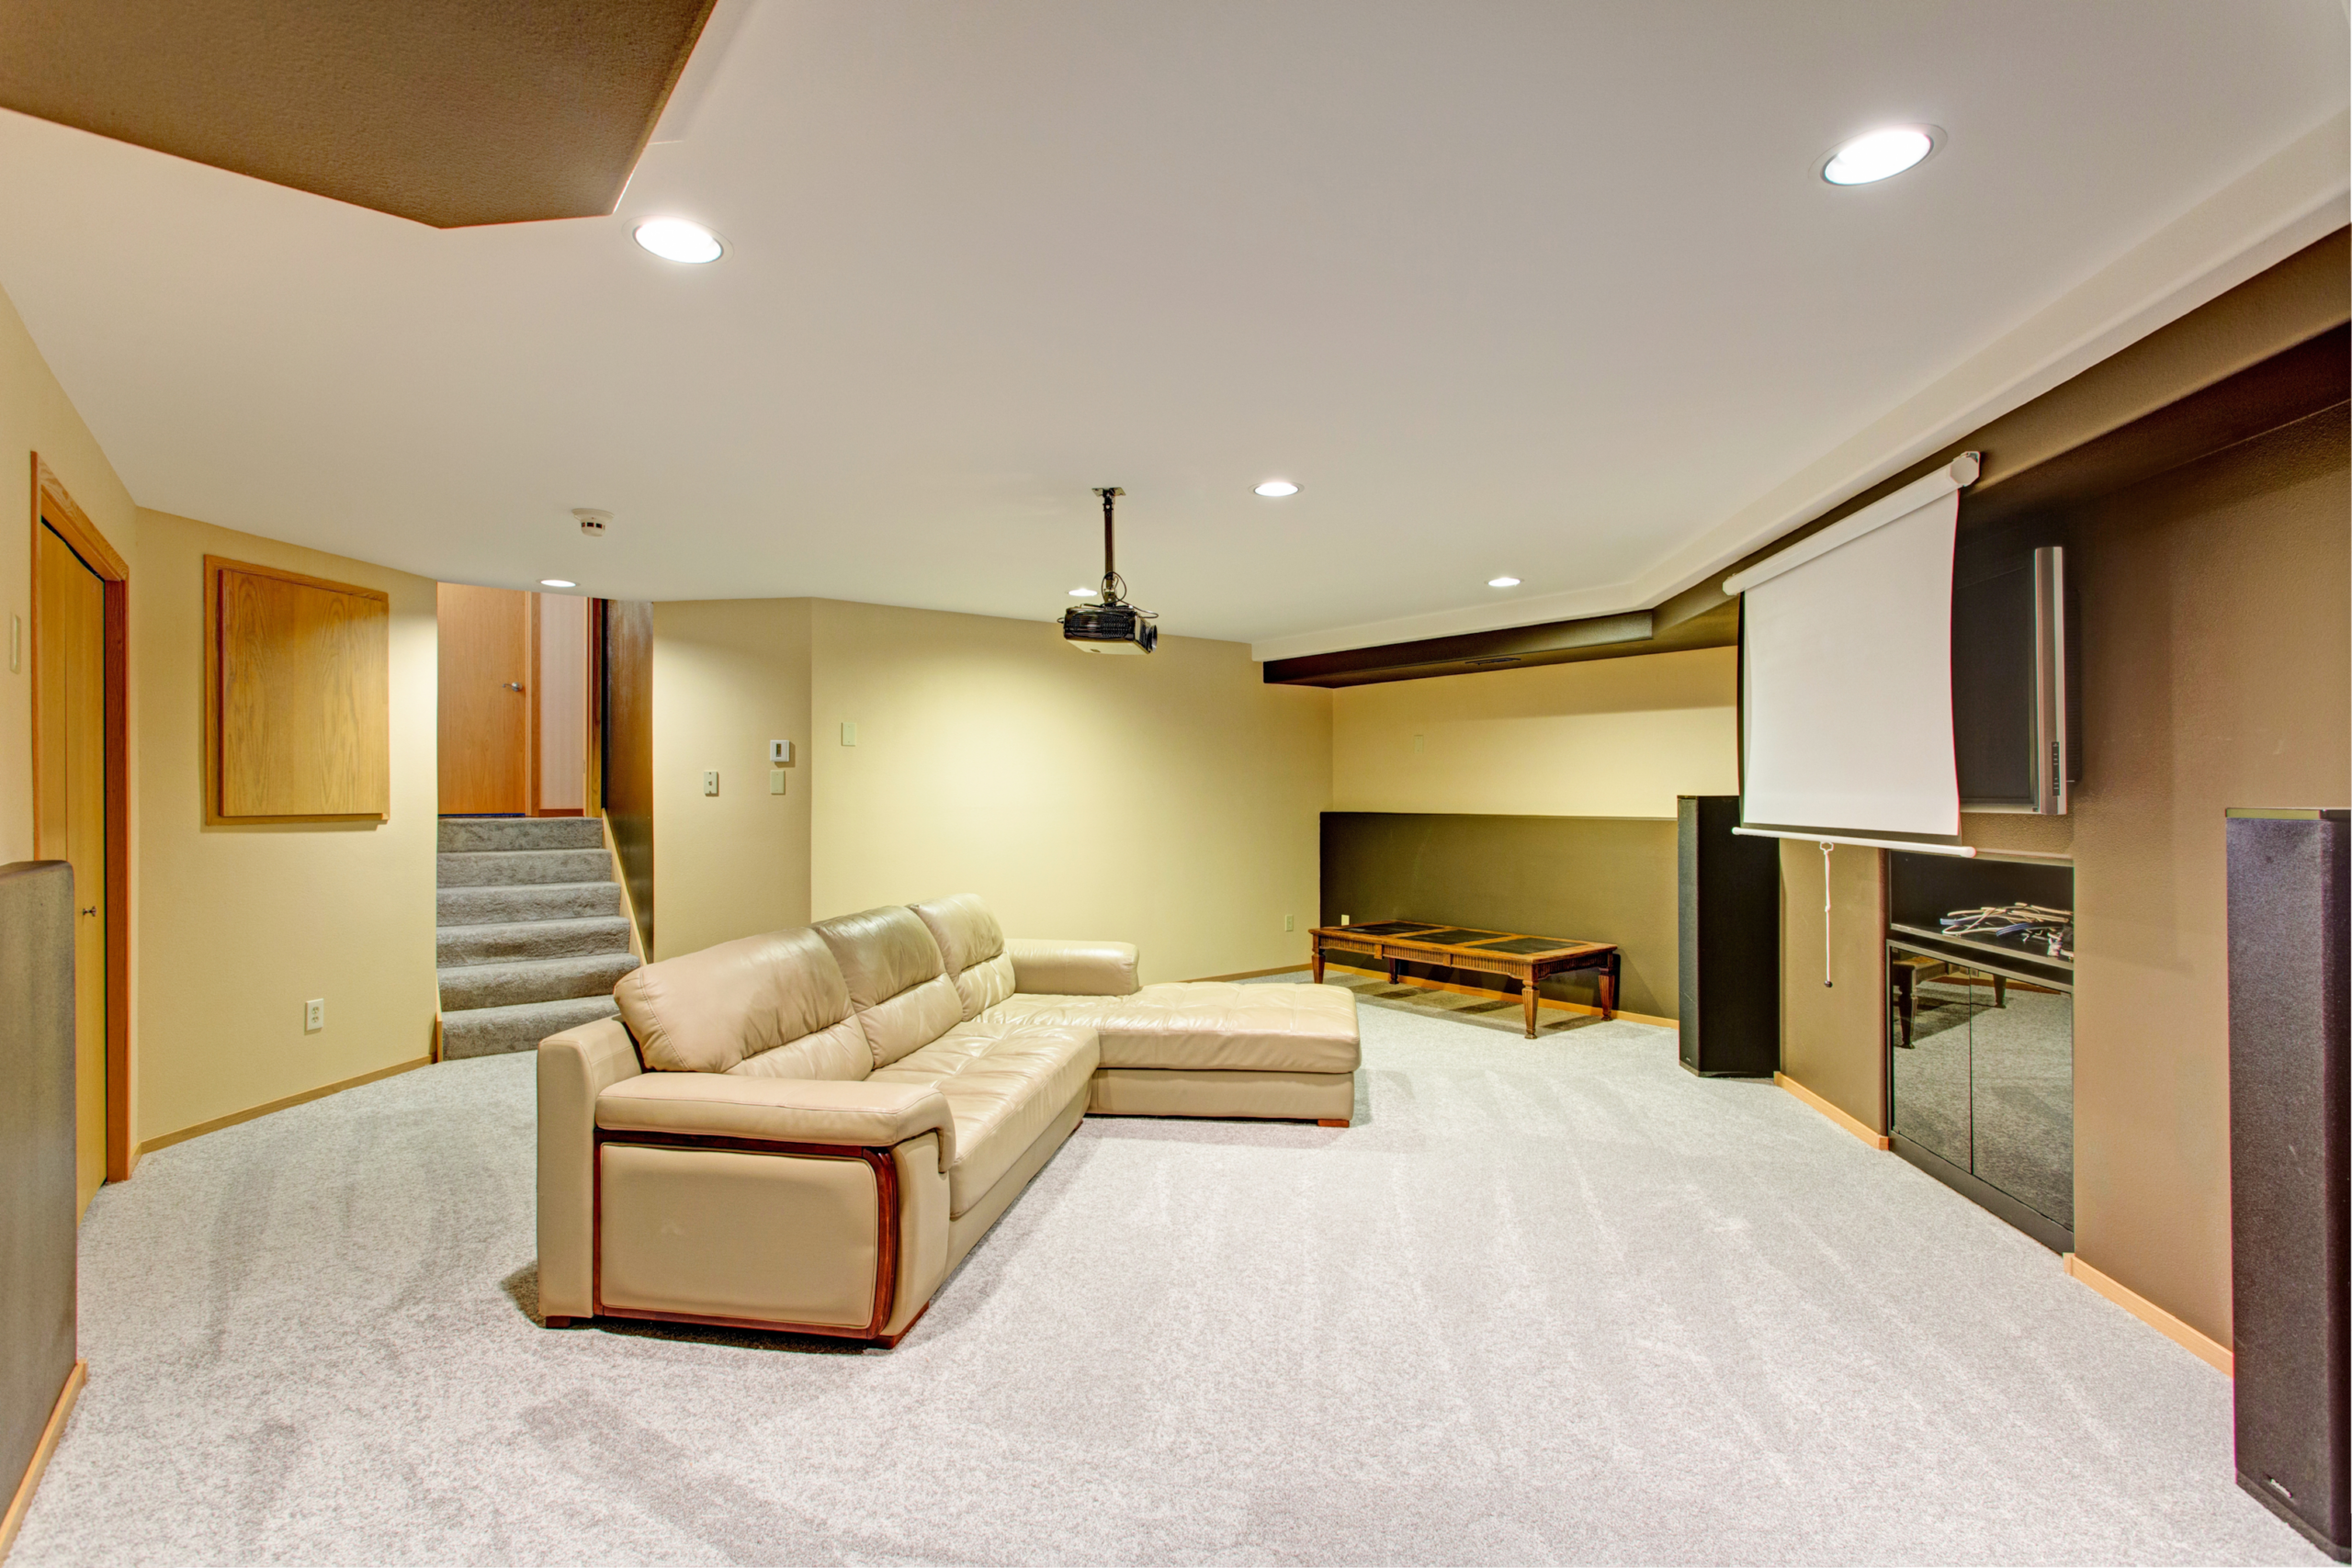 Popular Basement Remodeling Projects